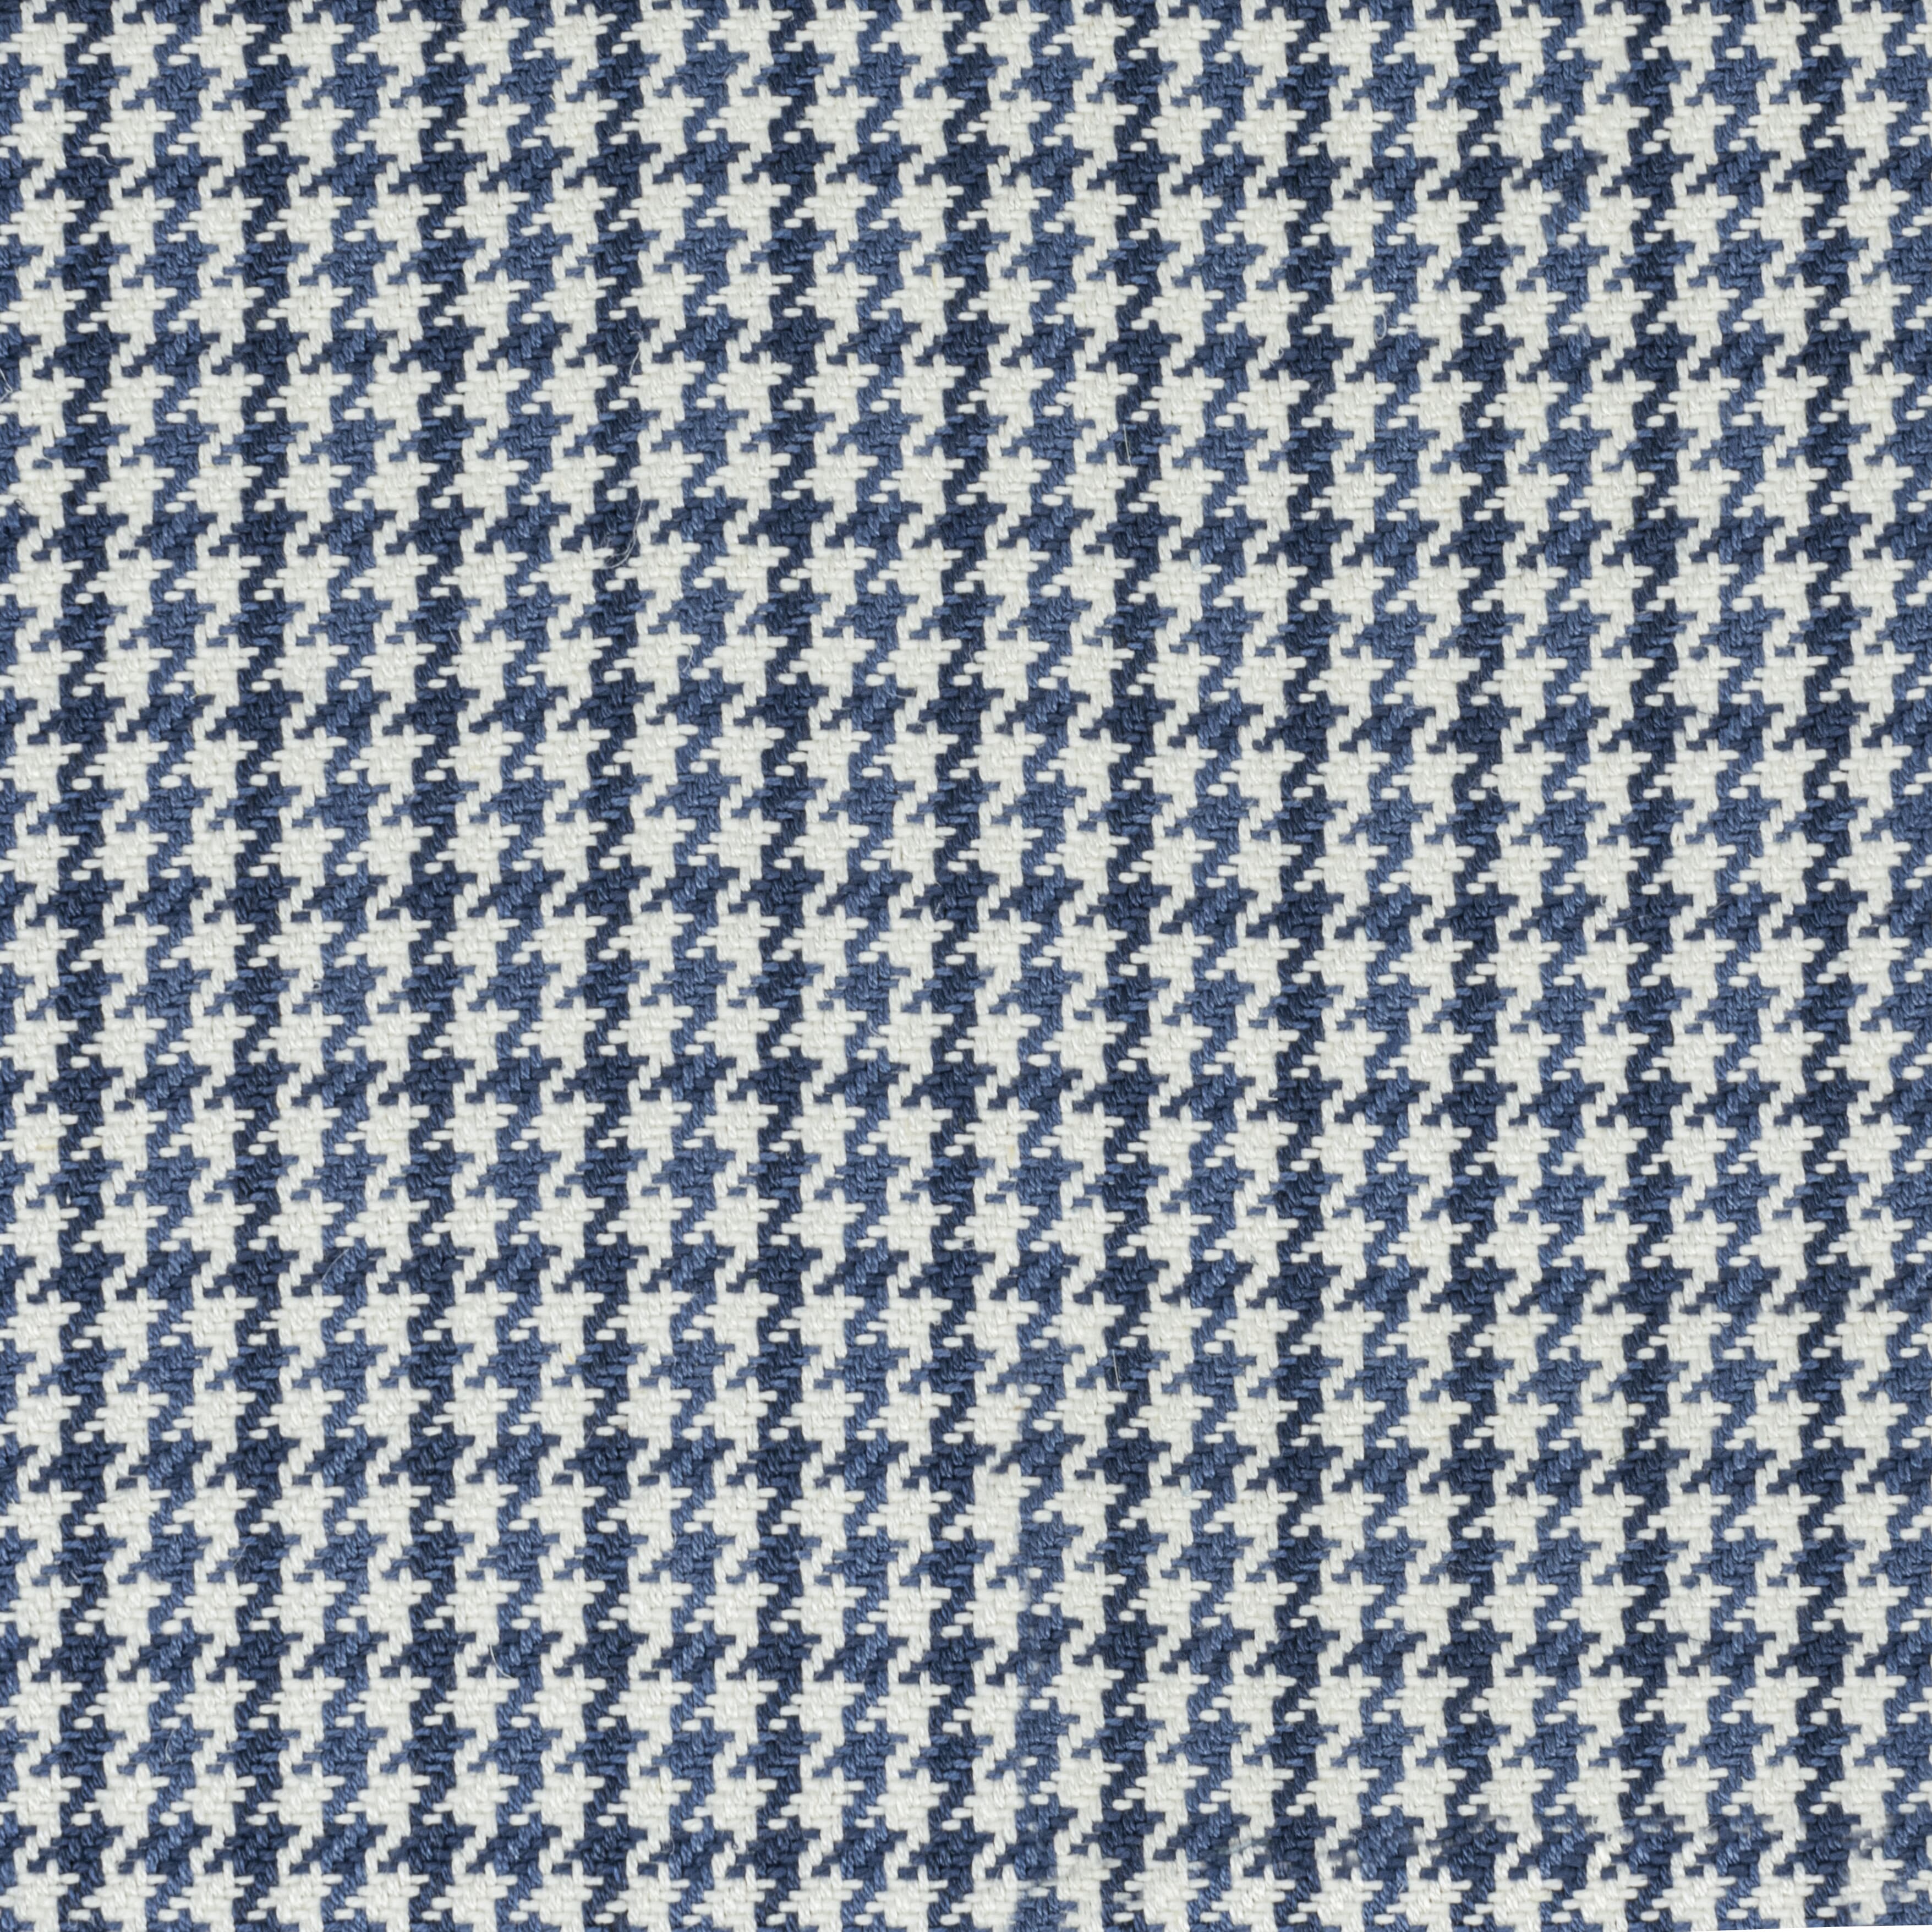 7809-2 Gridlock Ocean by Stout Fabric